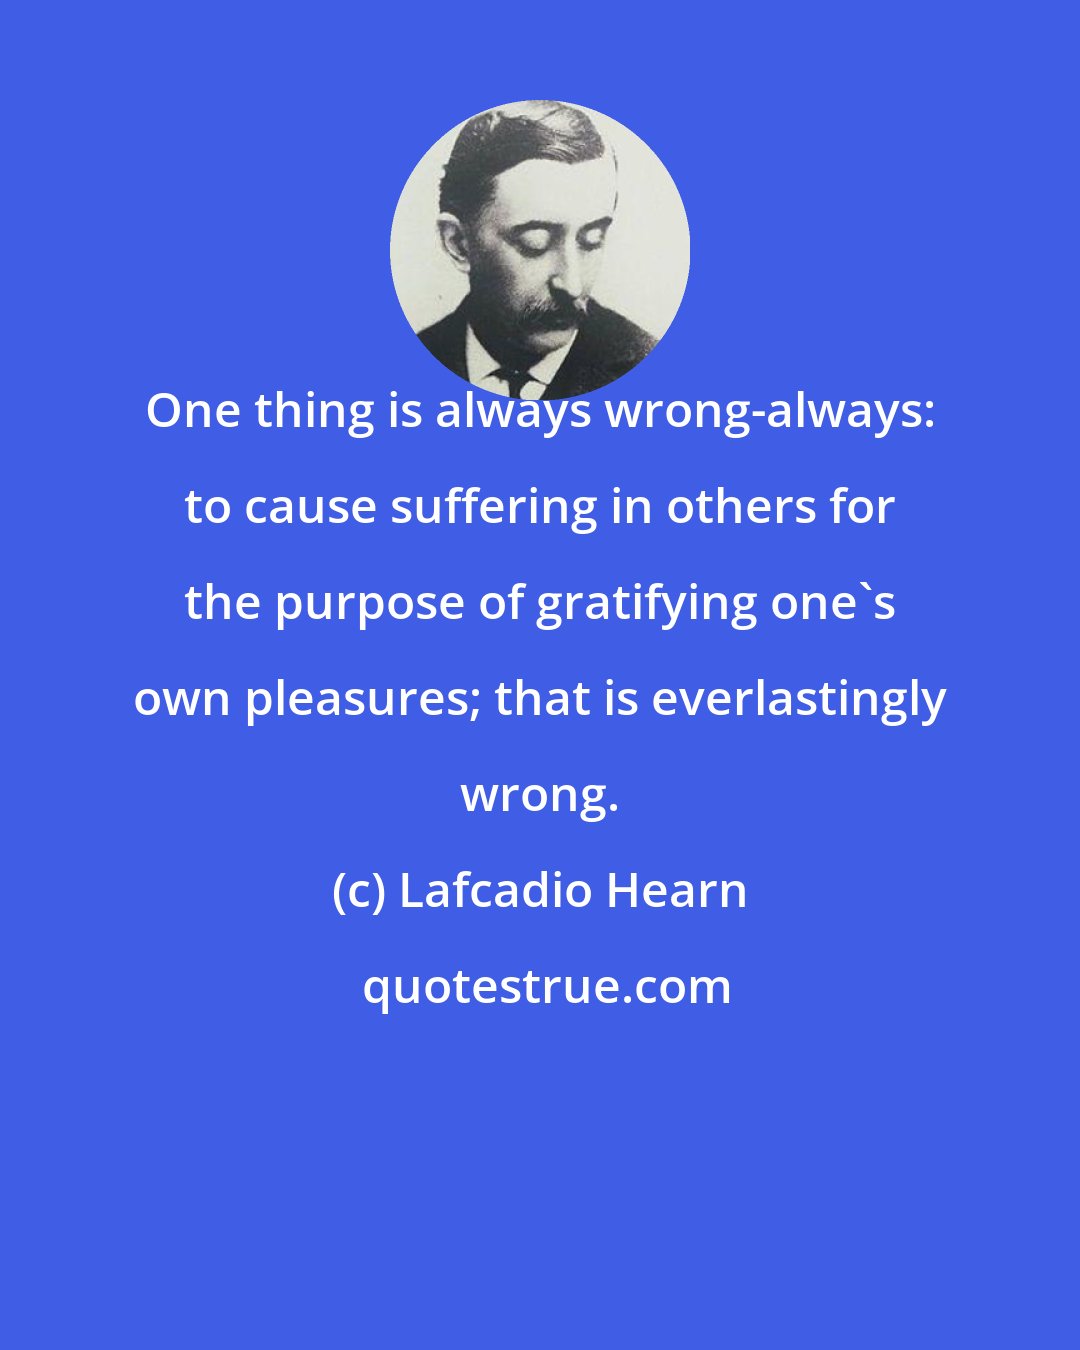 Lafcadio Hearn: One thing is always wrong-always: to cause suffering in others for the purpose of gratifying one's own pleasures; that is everlastingly wrong.